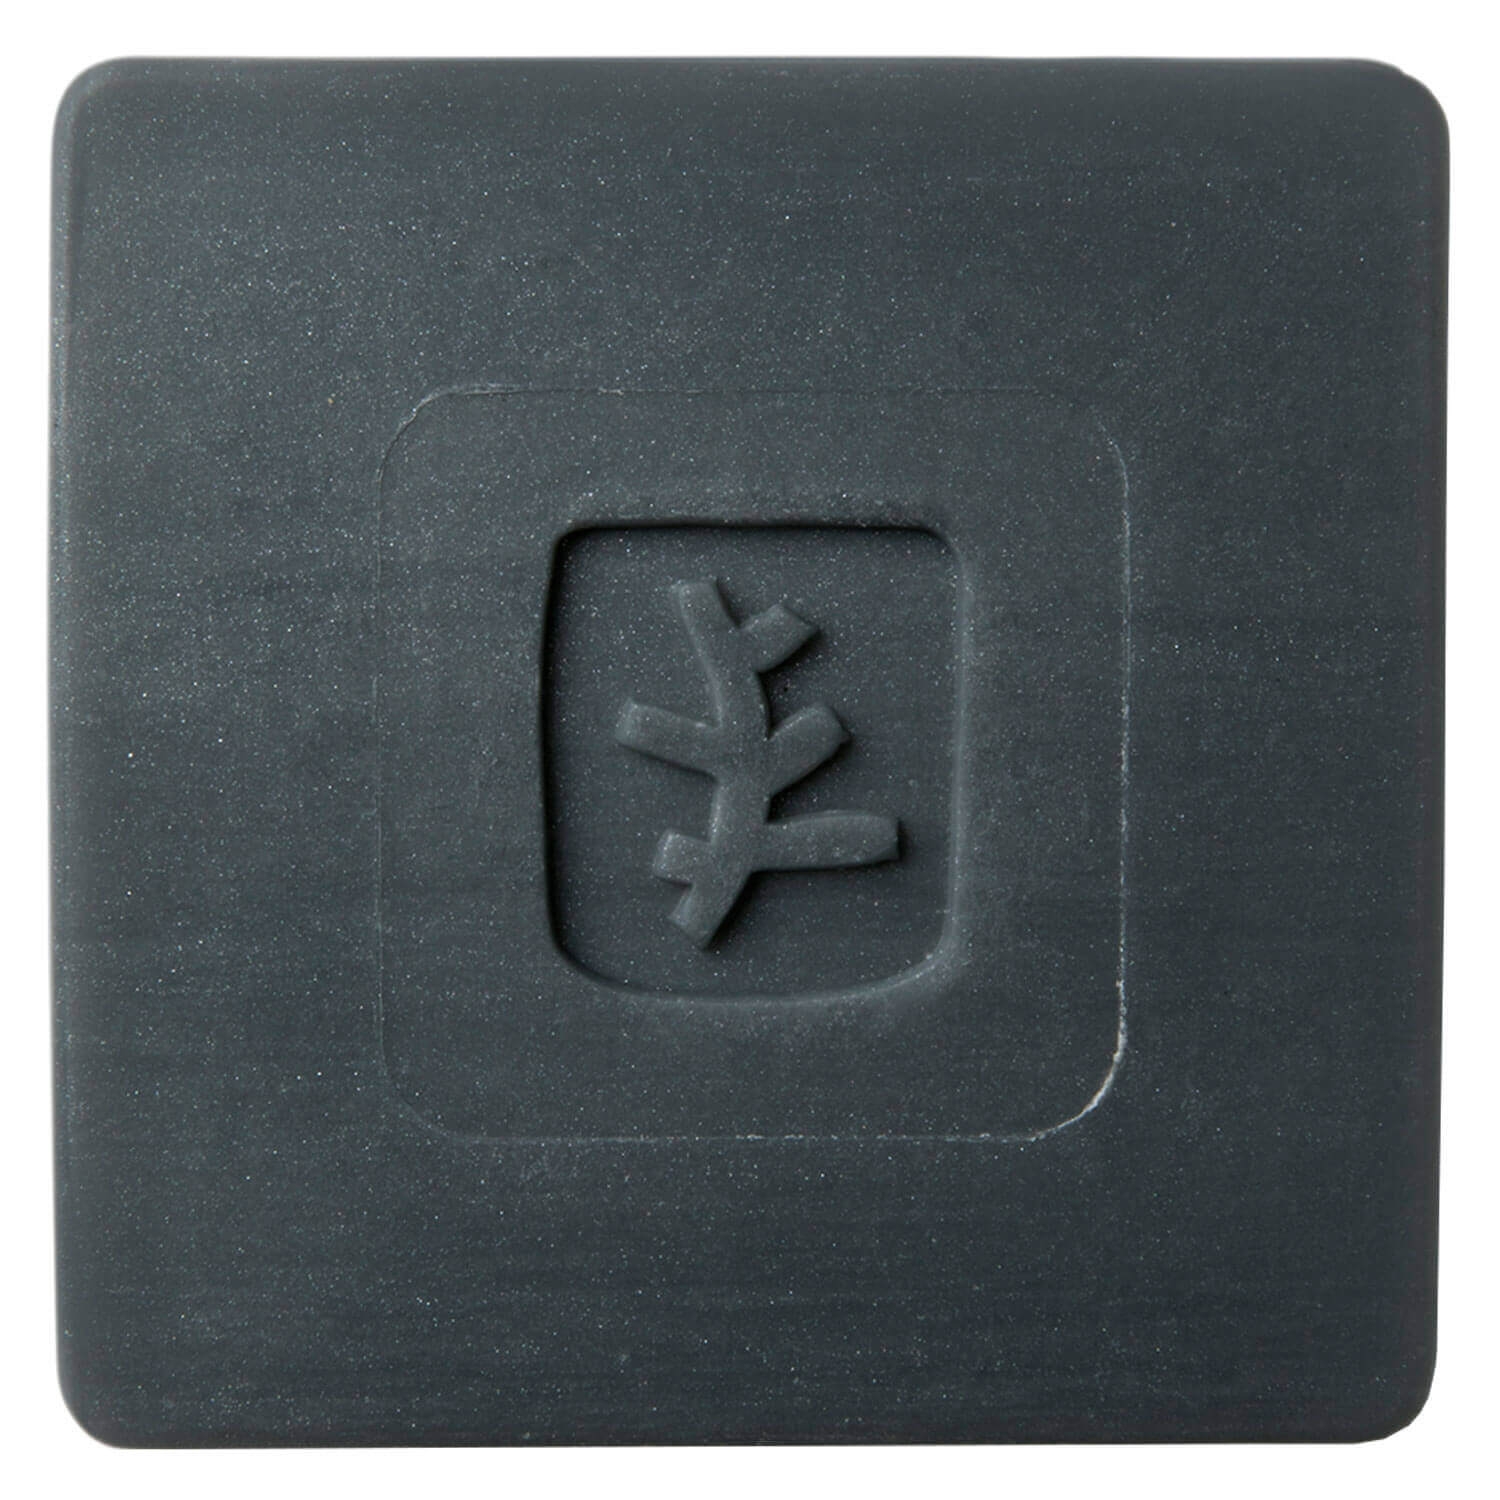 Product image from Charcoal - Black Soap